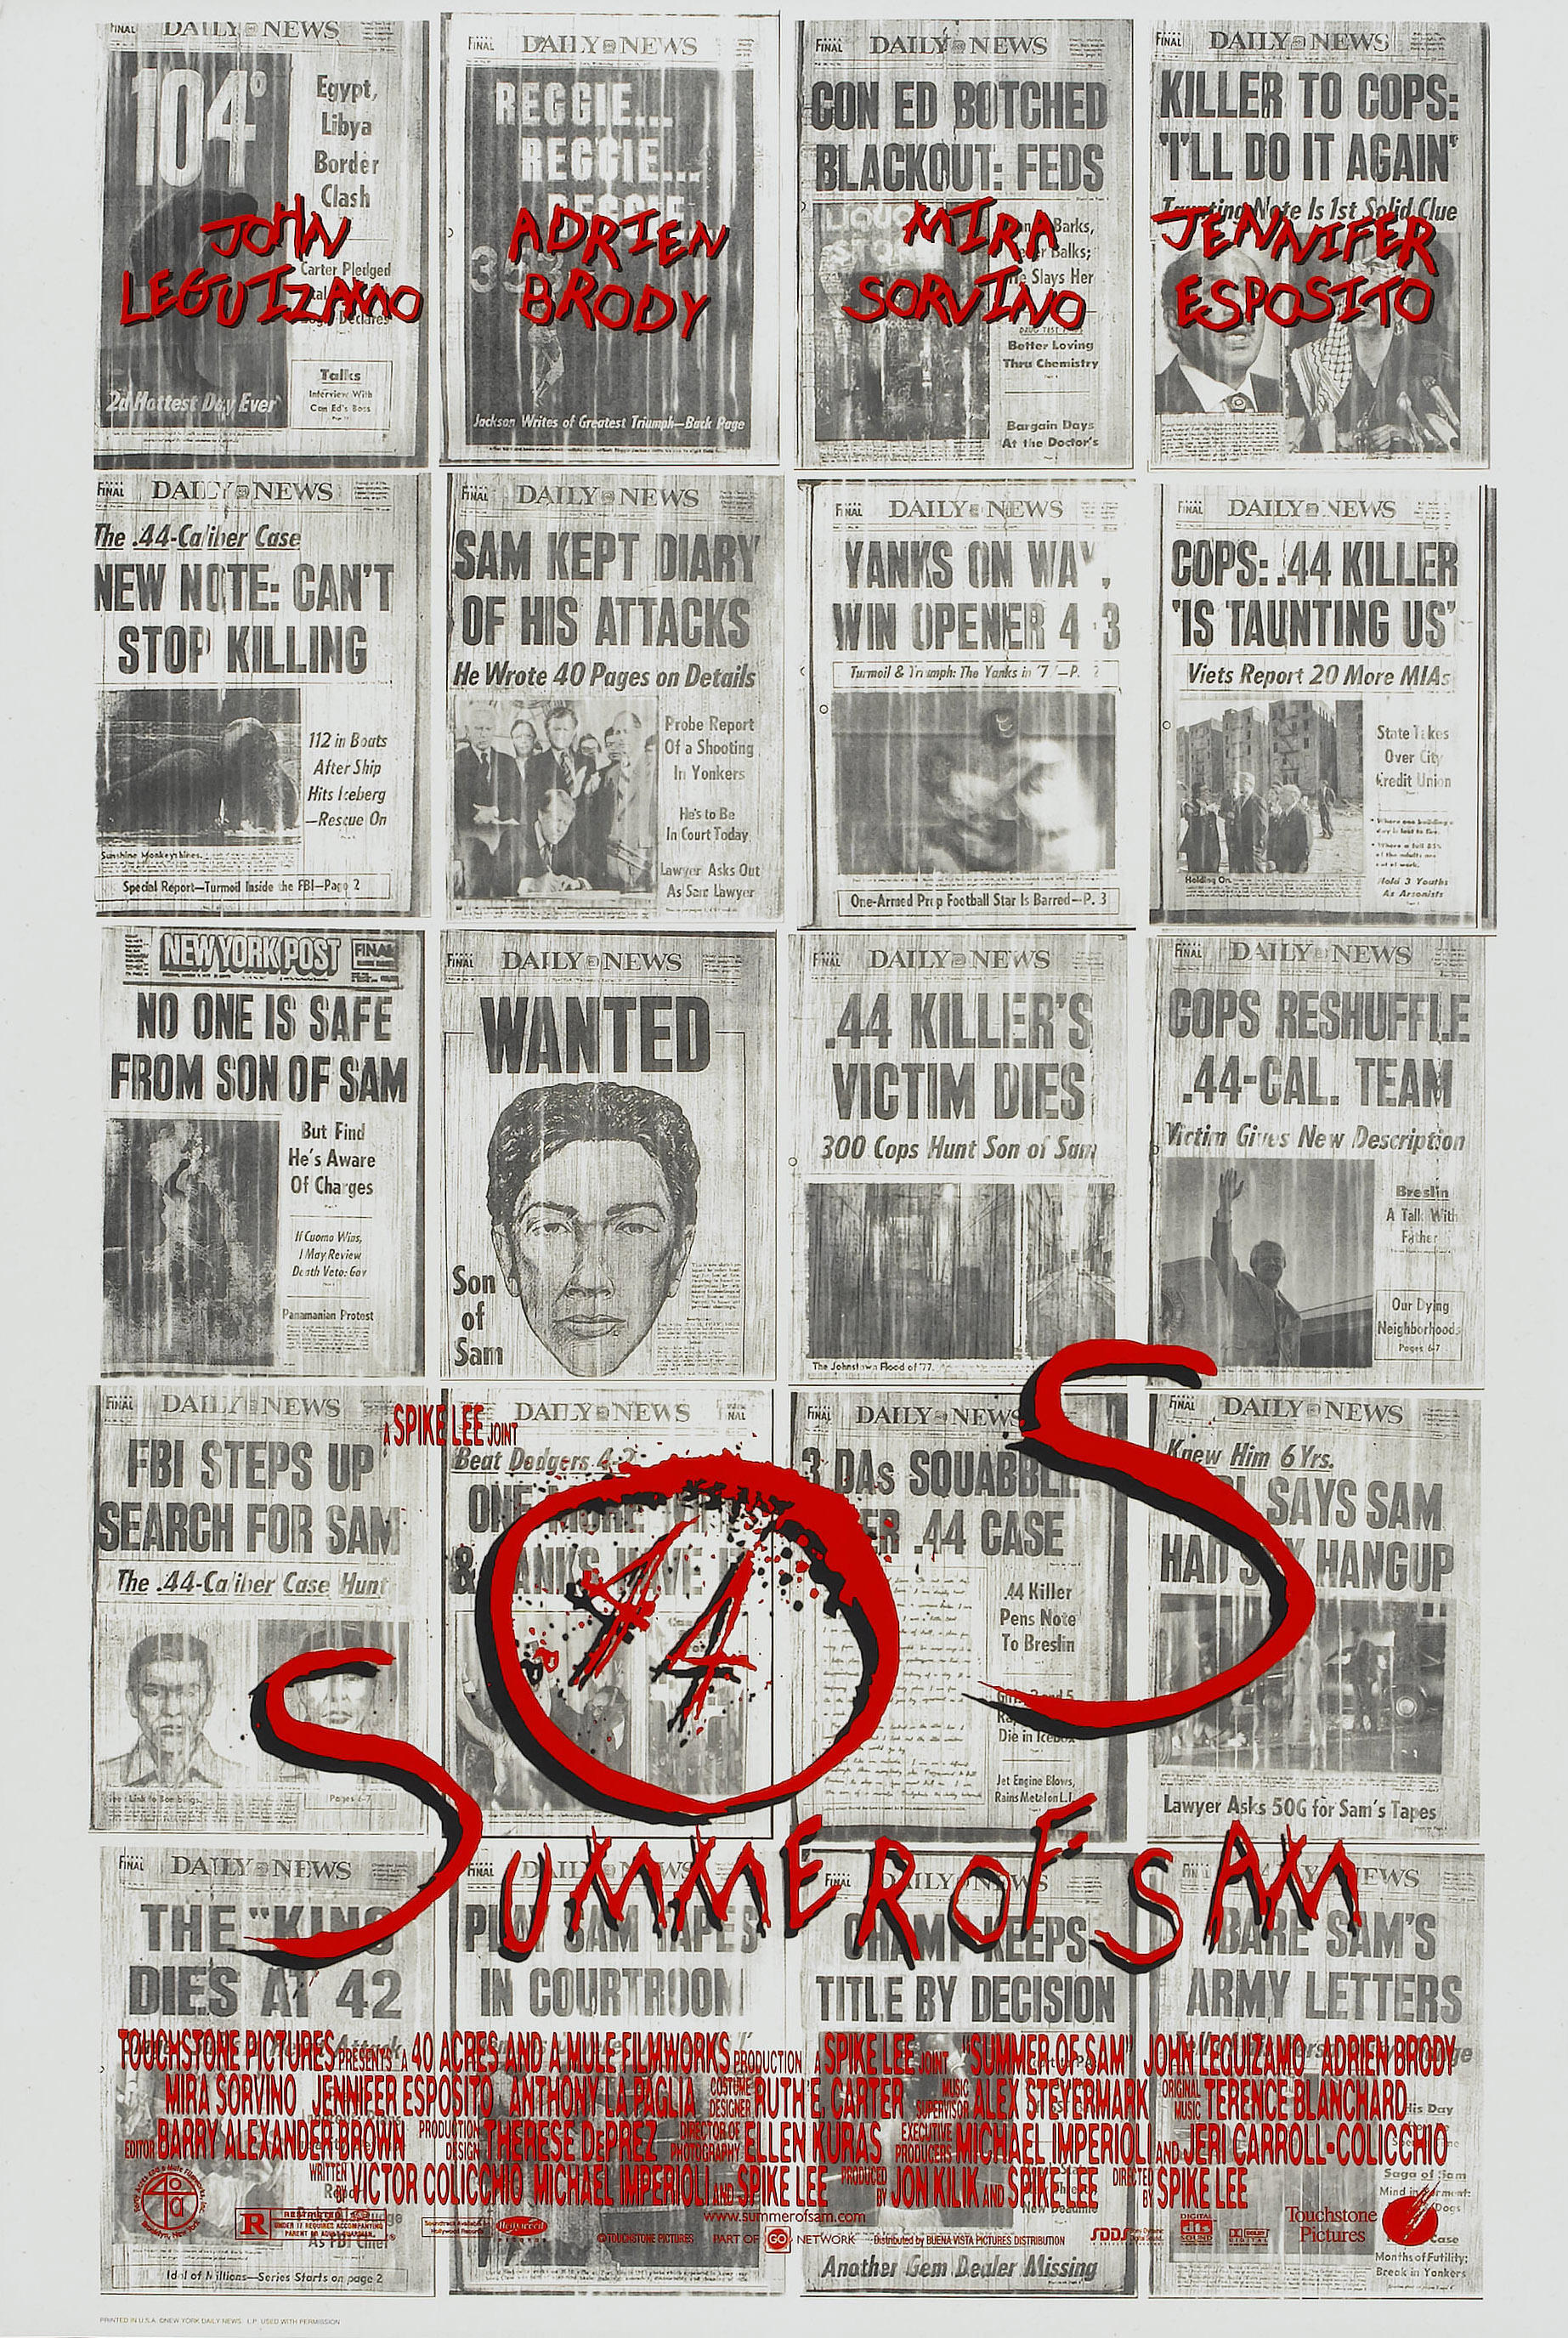 Poster image for the movie &quot;Summer of Sam&quot; showing several newspaper covers clustered together with headlines reporting on the Son of Sam killer; the title &quot;Summer of Sam&quot; is written in large red letters